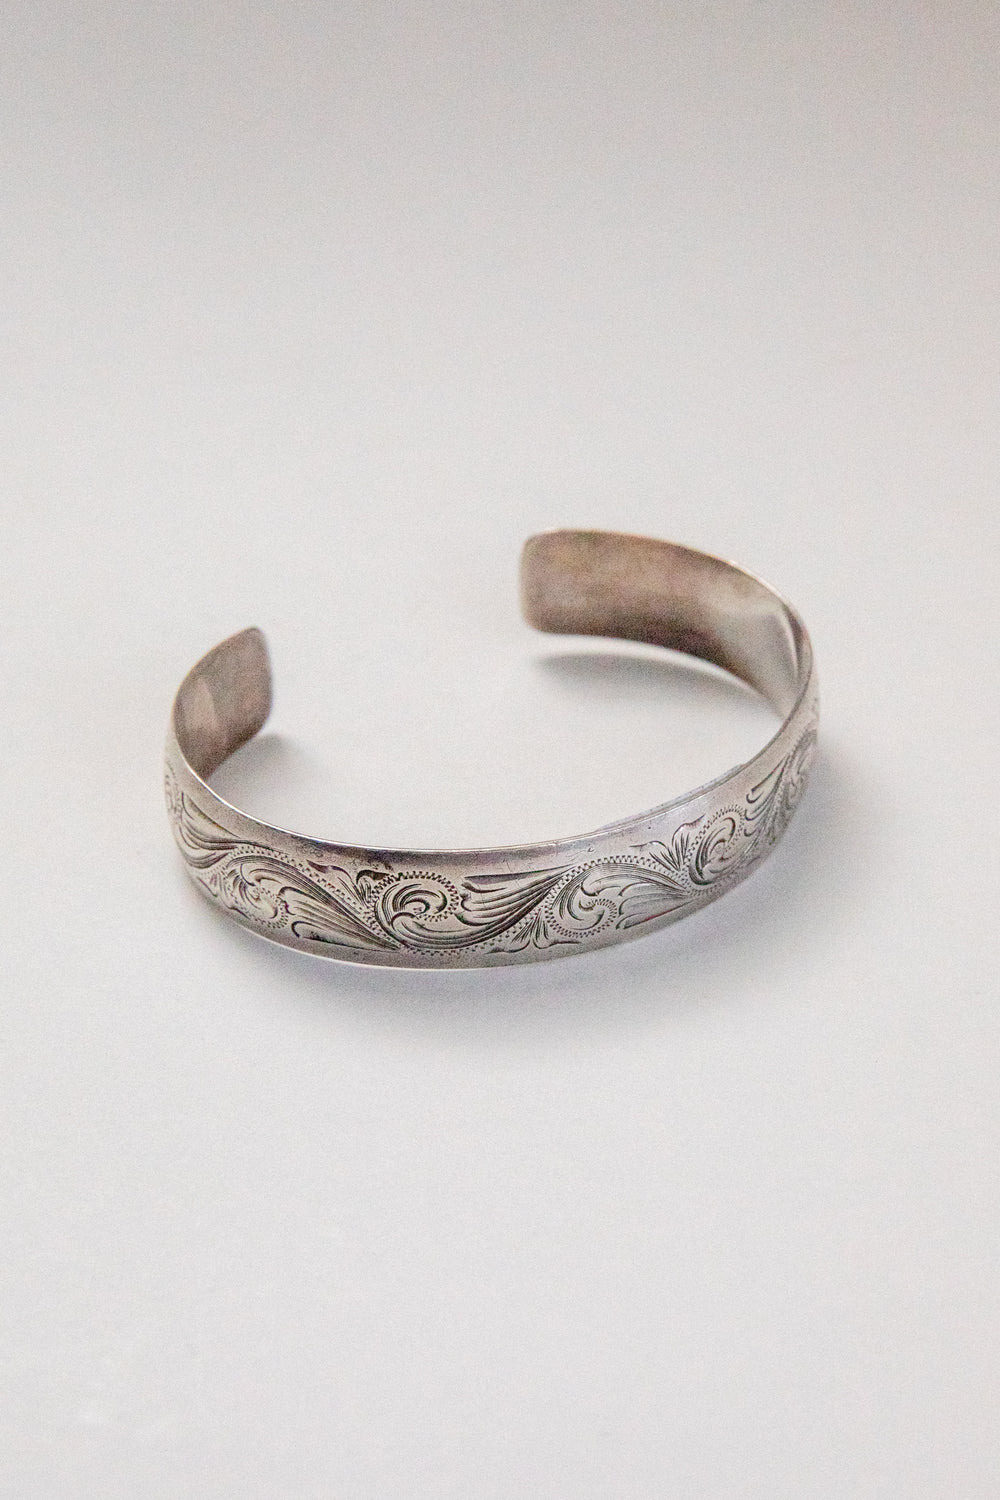 1940s Mexican Silver Stamped Cuff